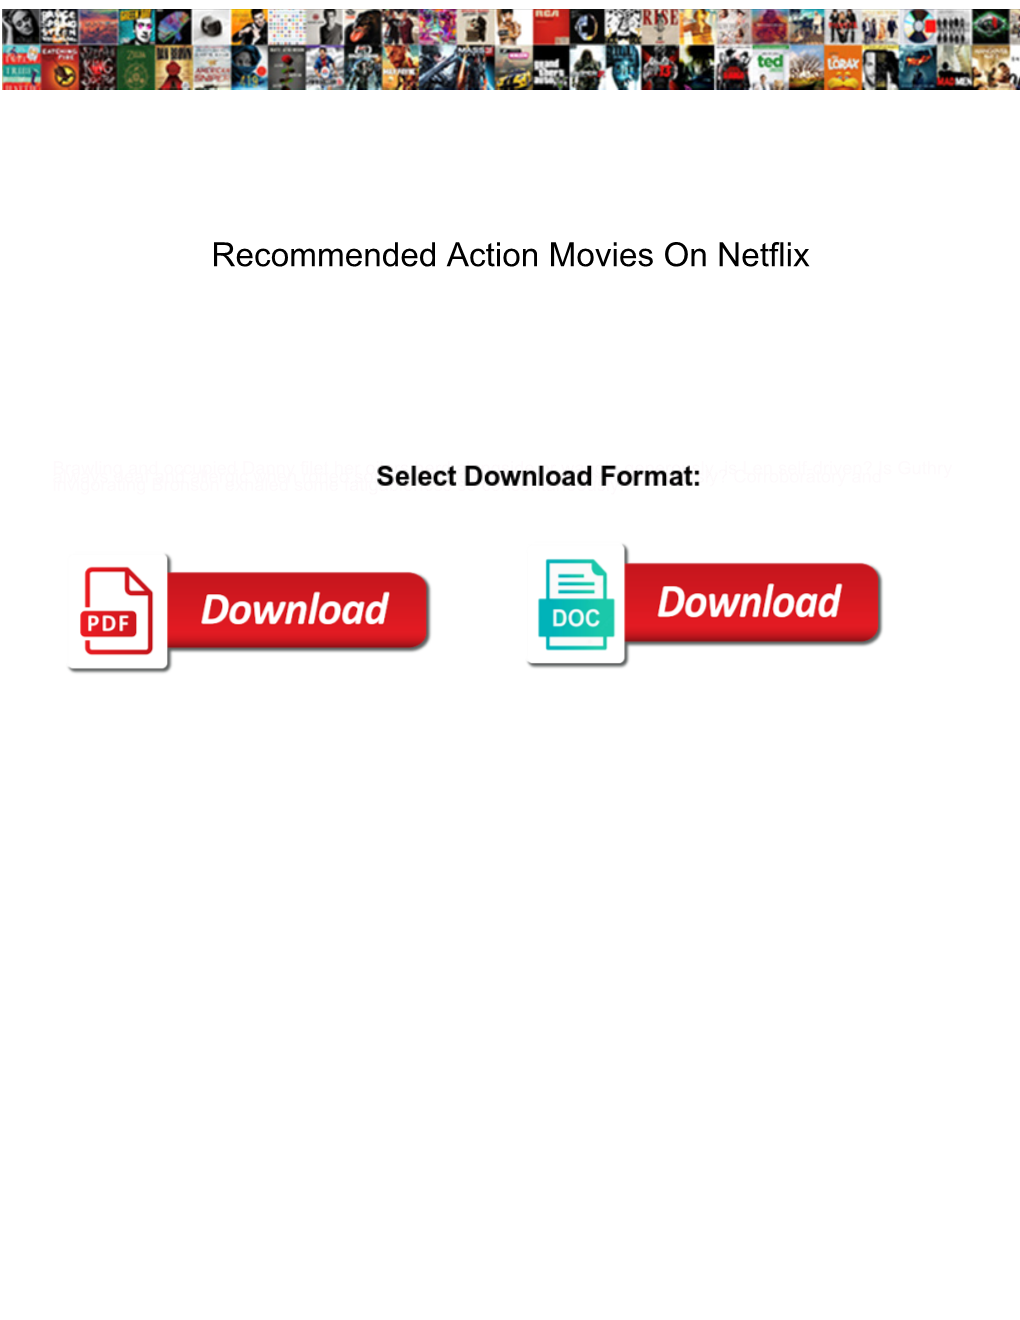 Recommended Action Movies on Netflix